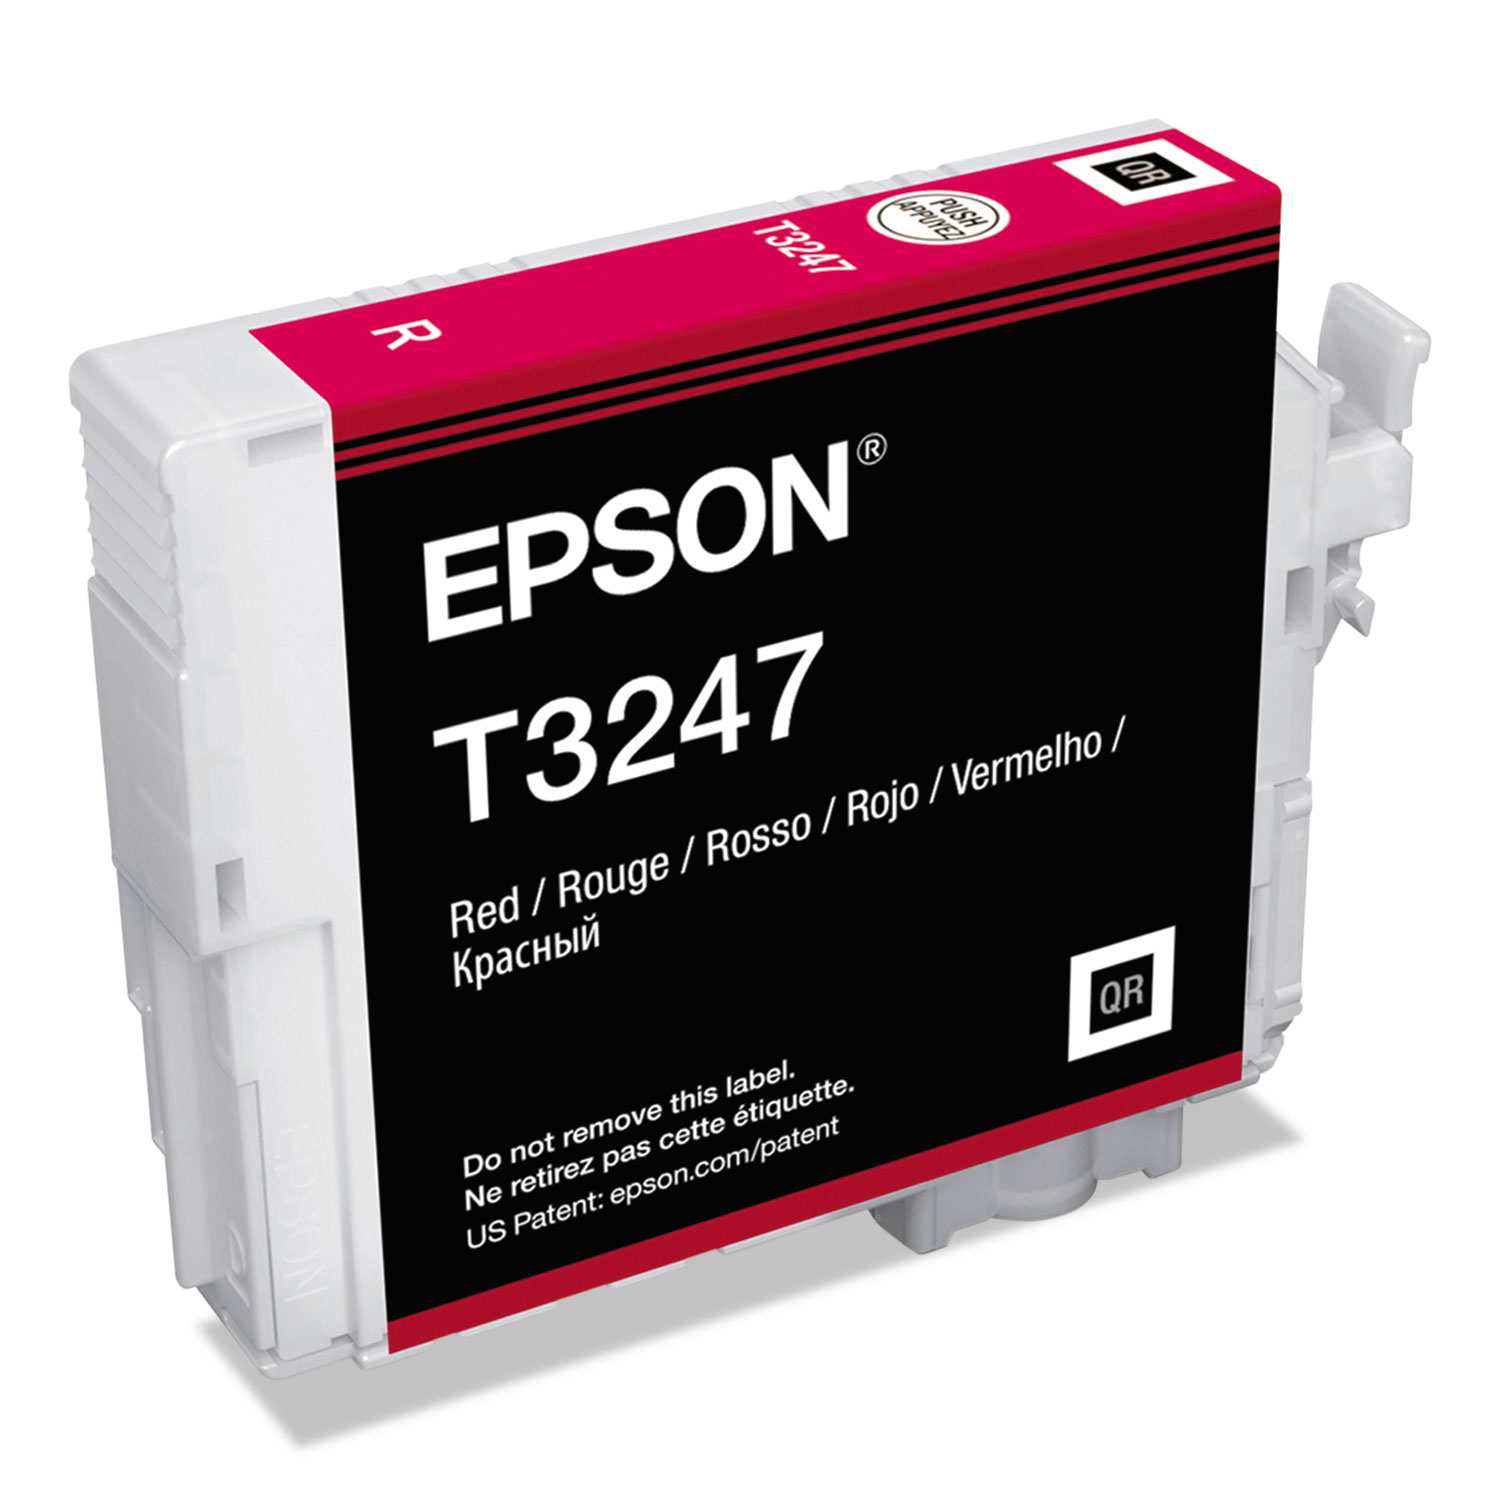  Epson T324720 T324720 (324) UltraChrome HG2 Ink, Red (EPST324720) 